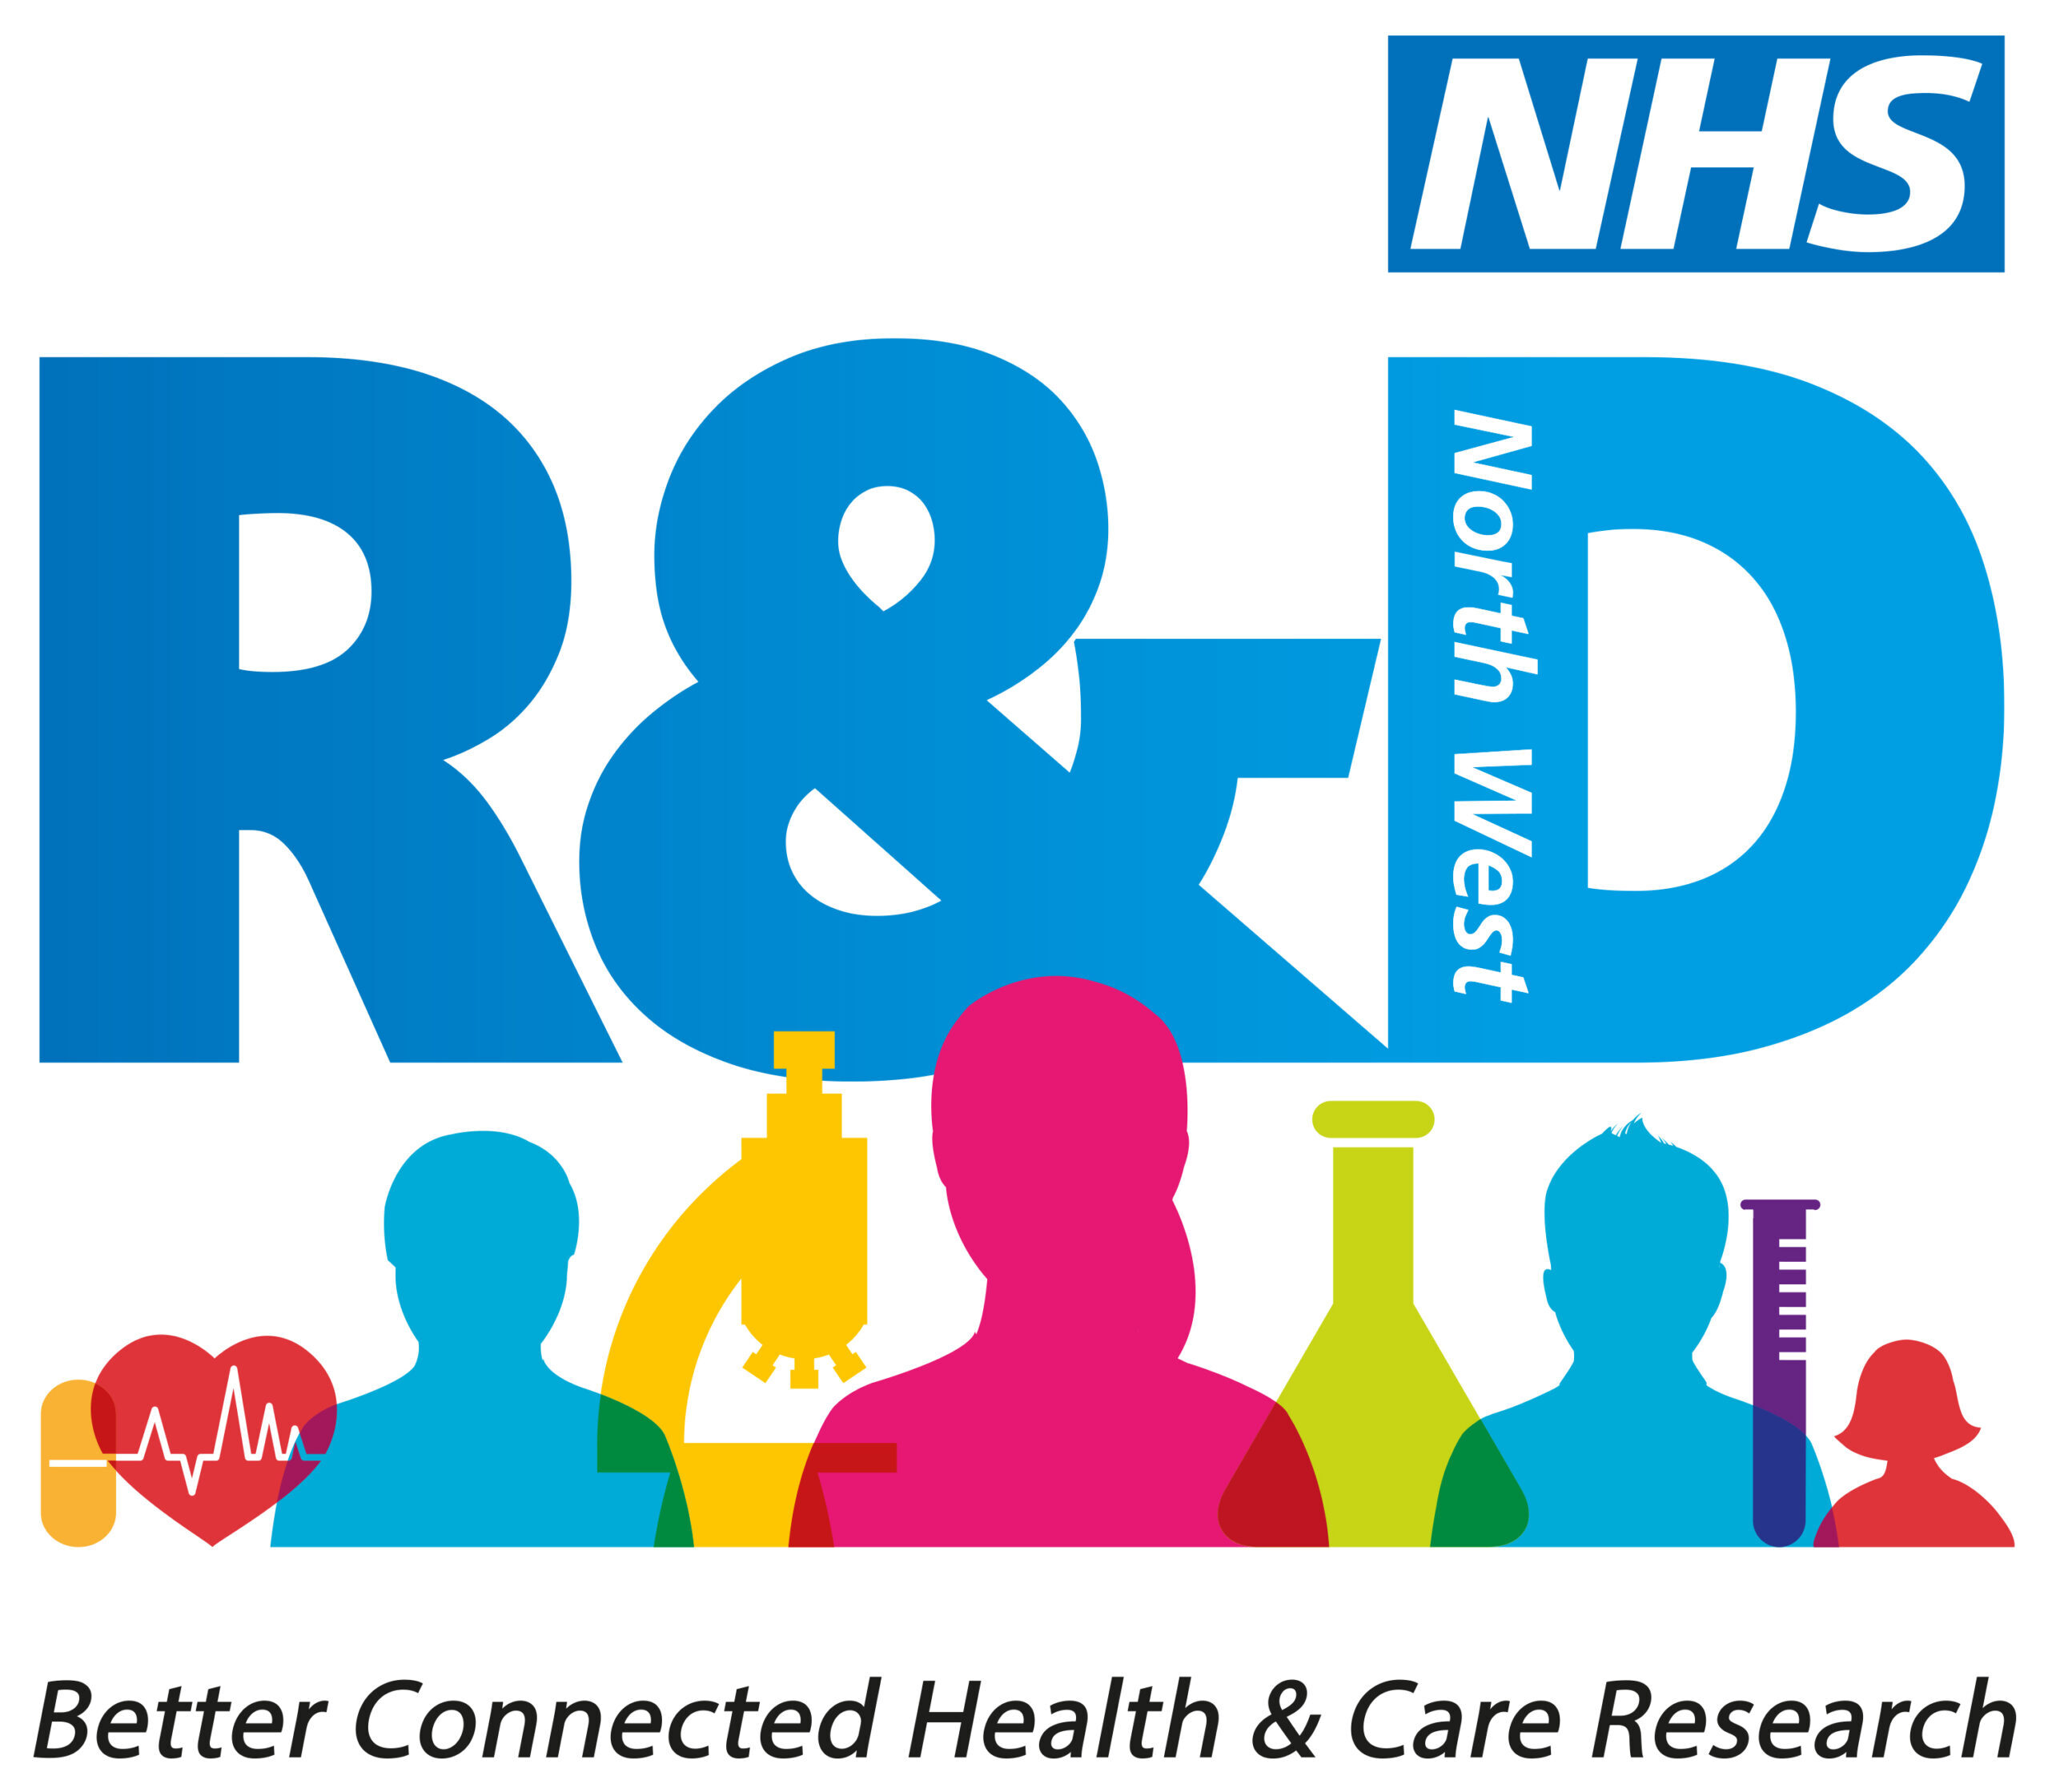 NHS Research and Development North West